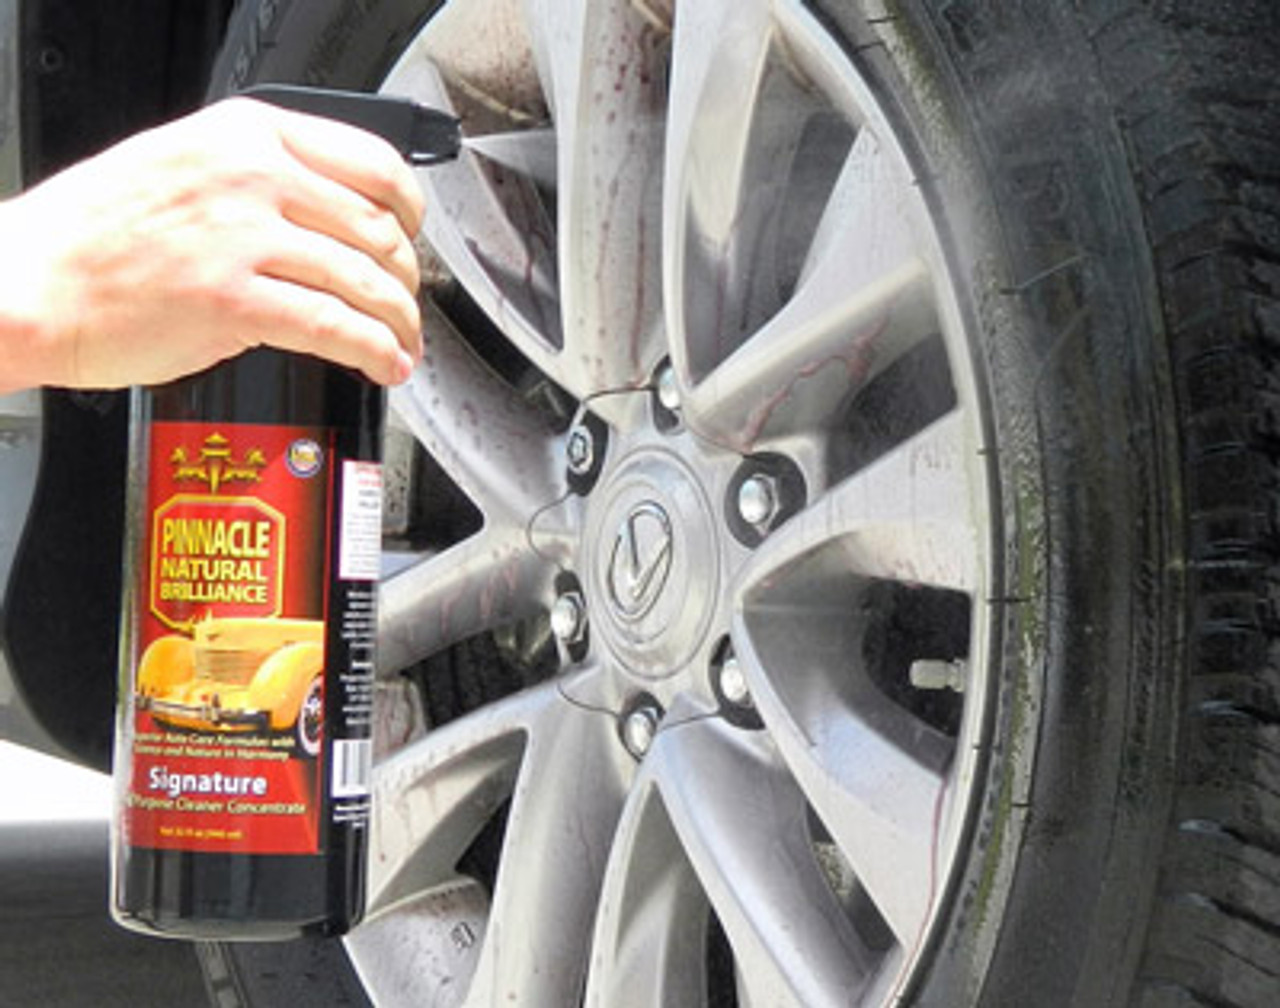 Pinnacle Black Onyx Tire Gel protects and shines tires, rubber